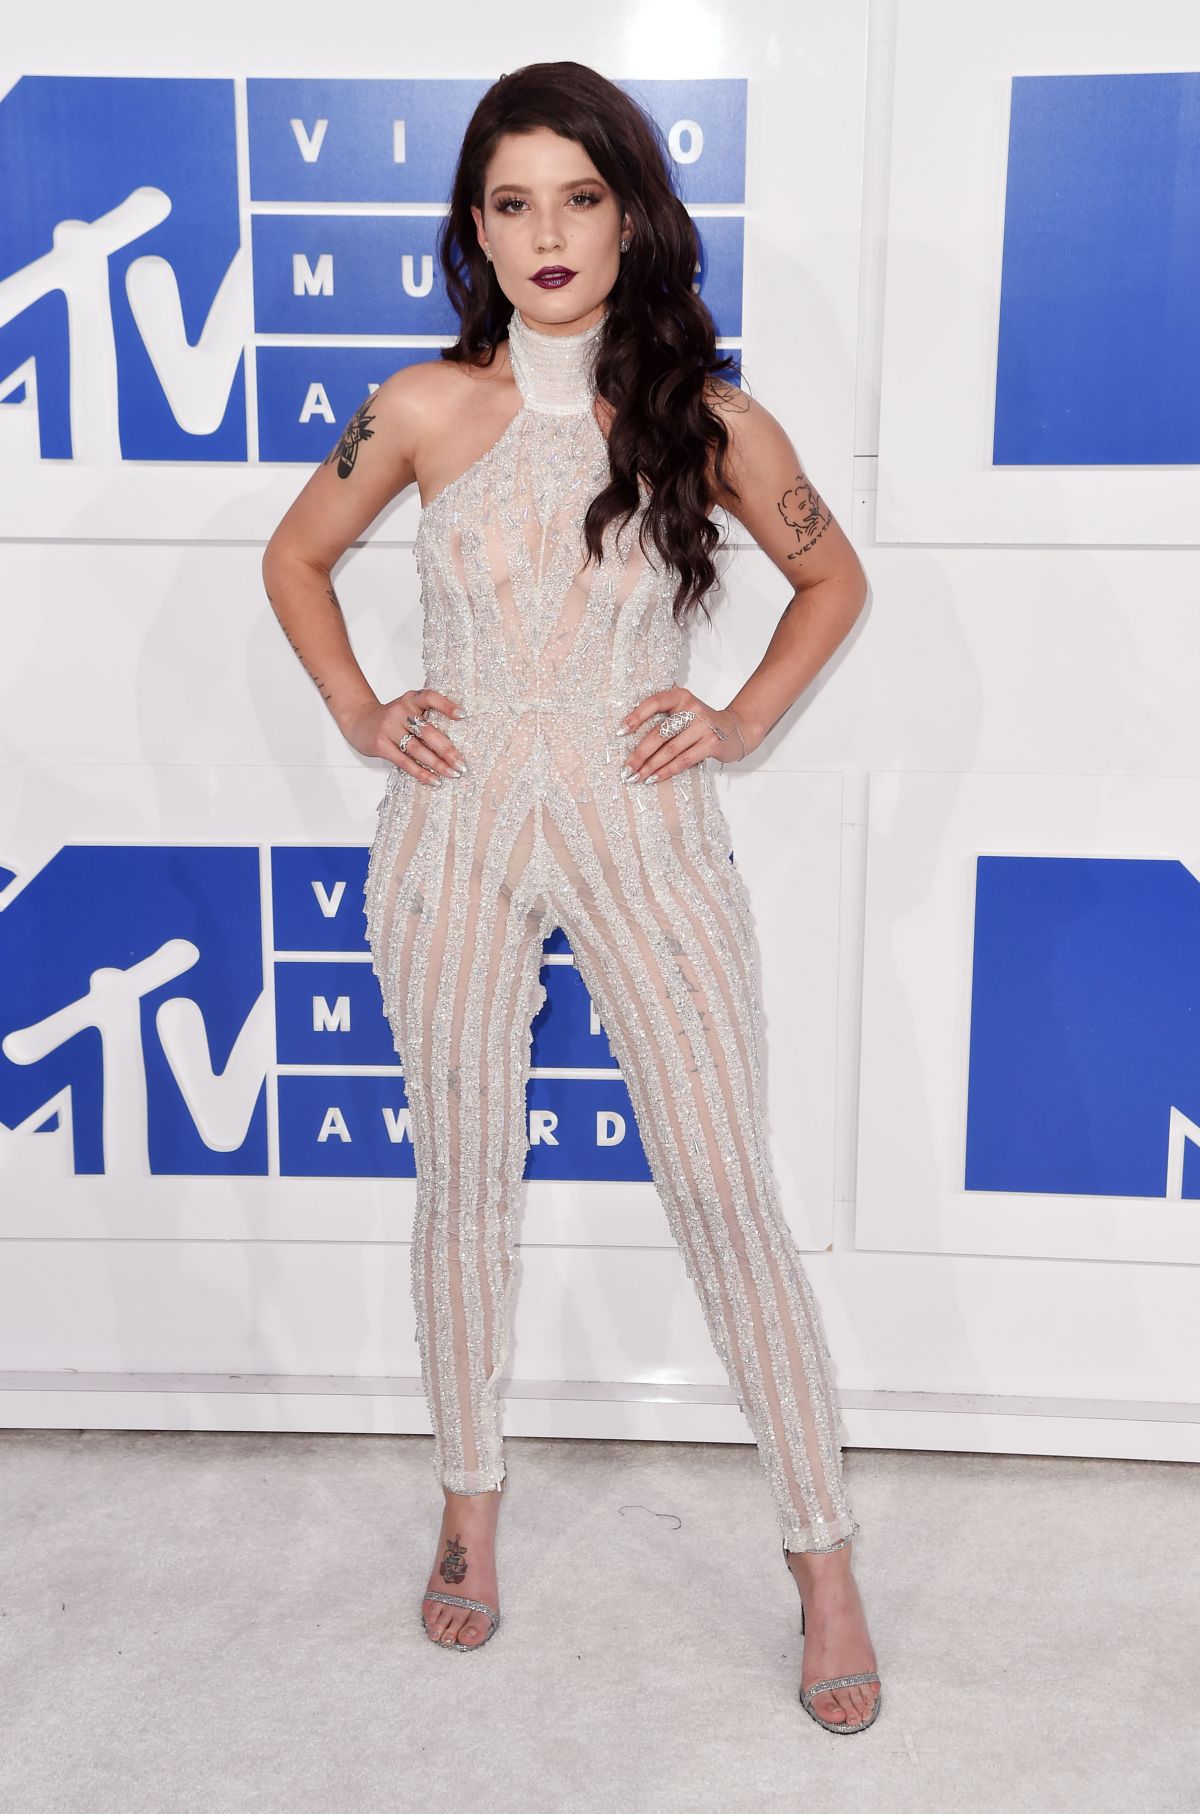 HALSEY at 2016 MTV Video Music Awards in New York 08/28/2016 – HawtCelebs